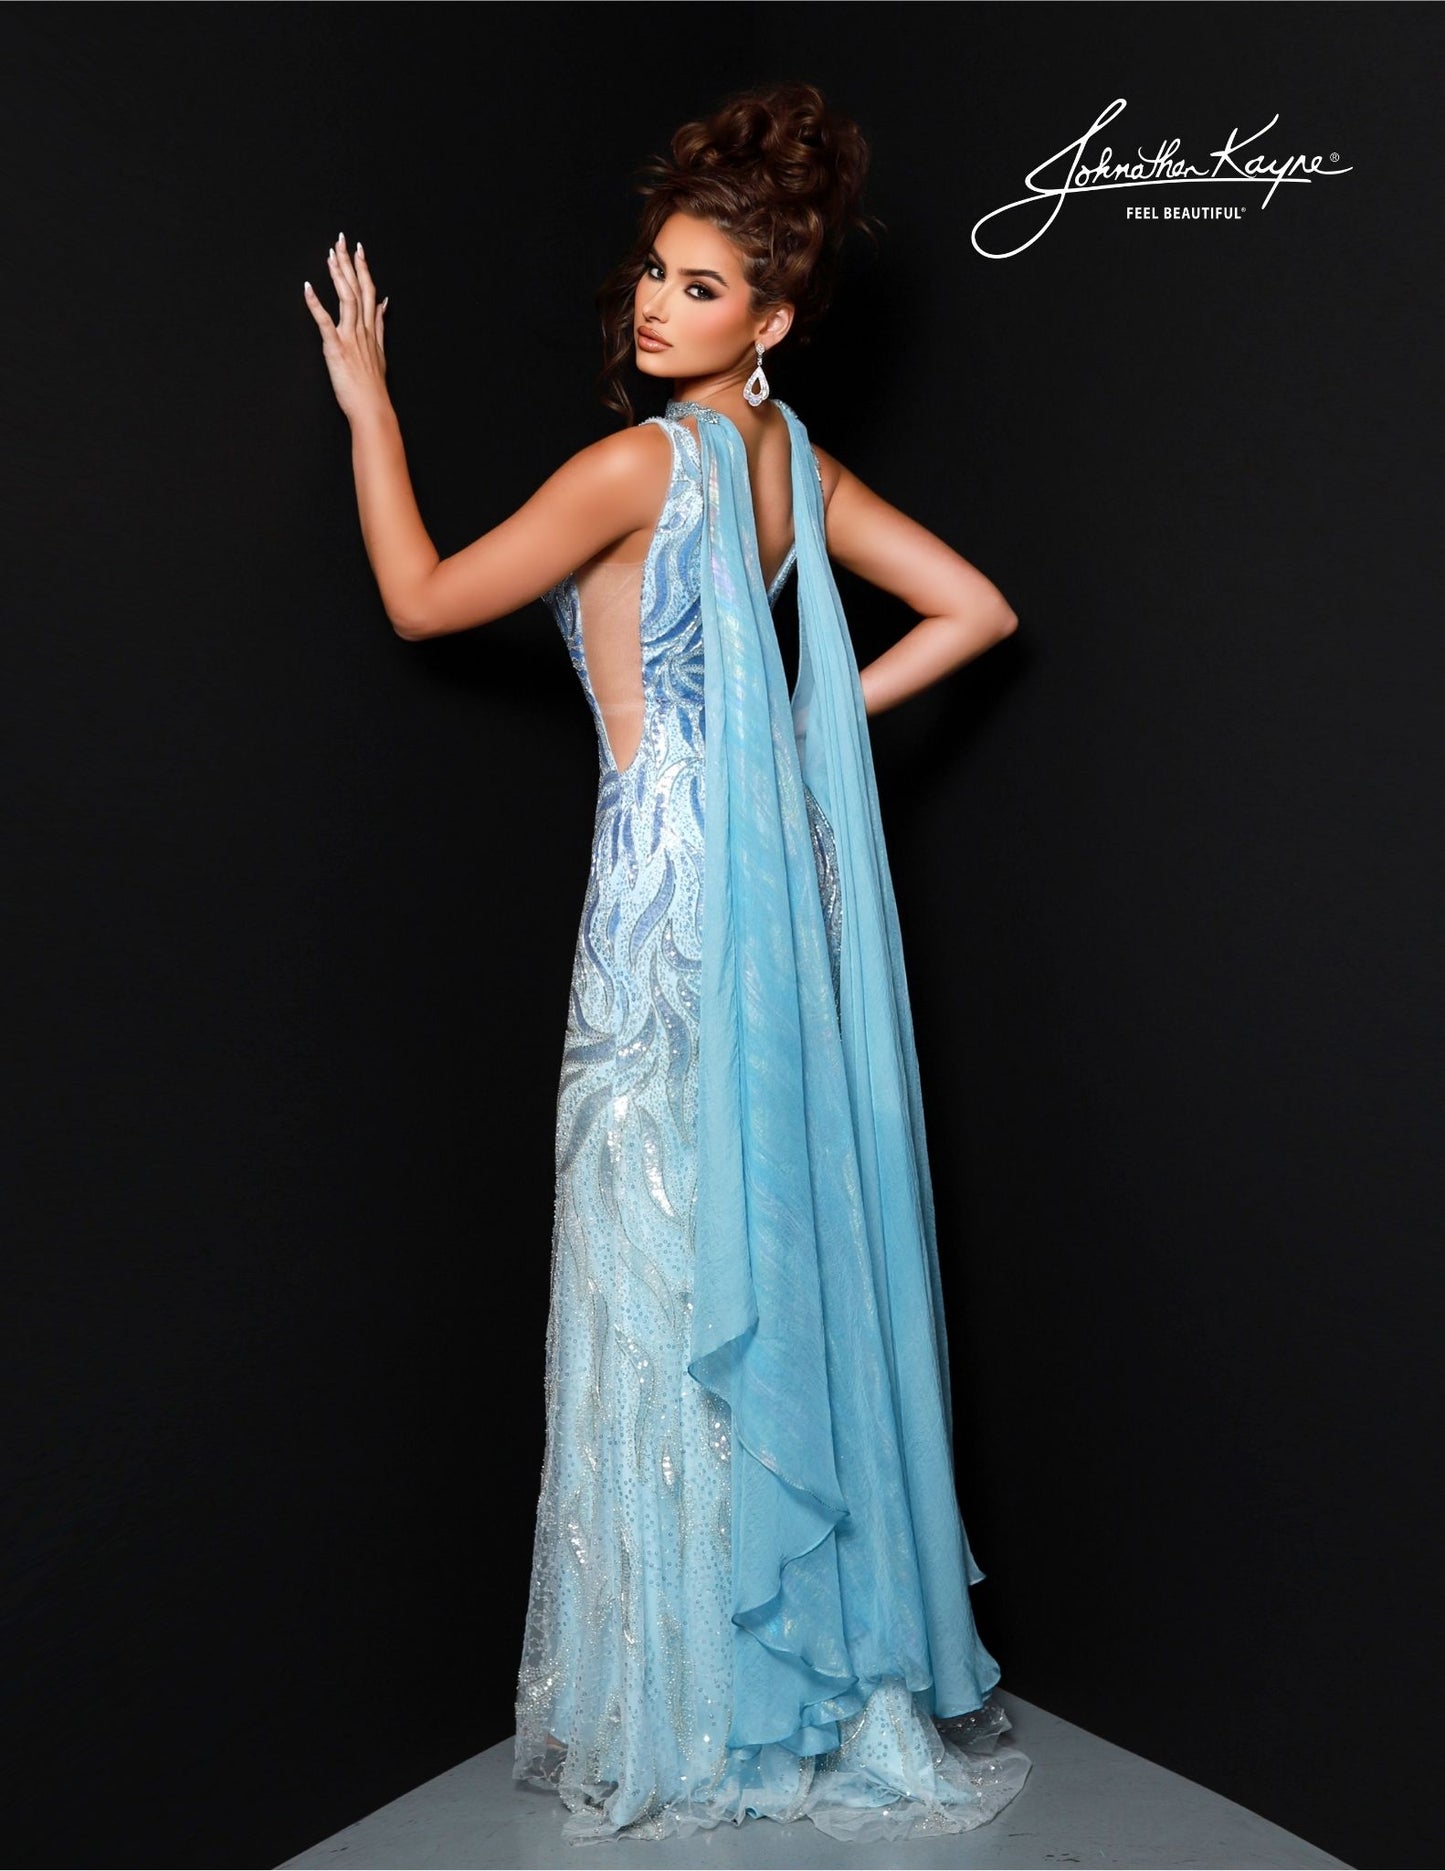 Johnathan Kayne's 2824 Long Prom Dress is perfect for a formal event. Crafted with a flattering mermaid silhouette and beaded choker cape, this elegant gown features a V-neckline, fitted waist and full-length hem. Ideal for pageants or proms. Drape yourself in luxury! This stunning gown features intricate beadwork on a mesh overlay, providing a captivating, shimmering effect. The detachable cape with choker adds a touch of drama and sophistication.